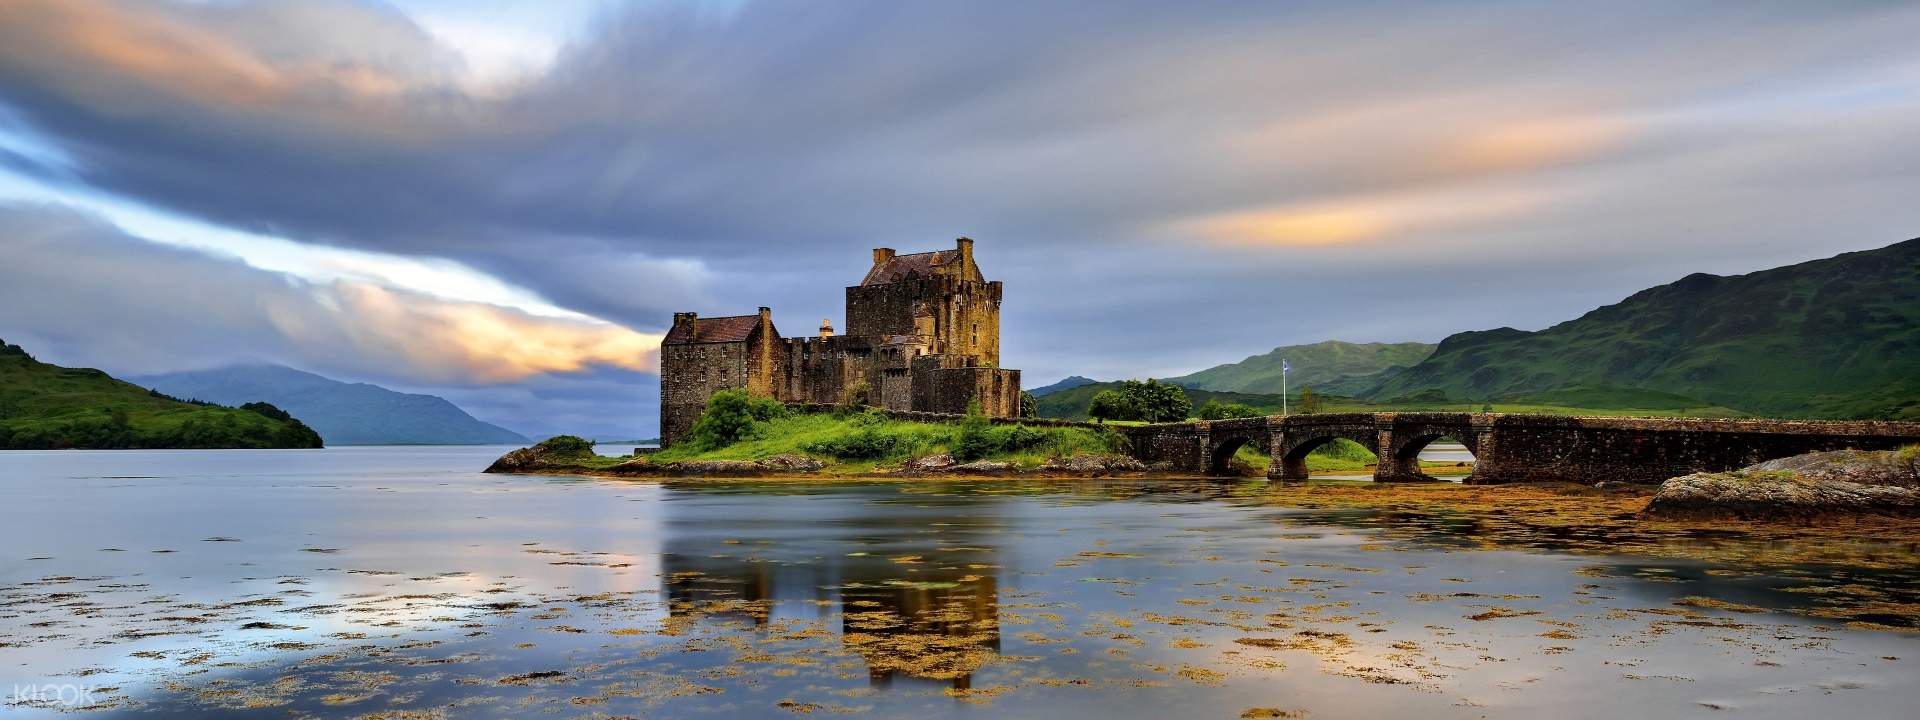 Up to 10% Off | Torridon, Applecross, and Eilean Donan Castle Tour from ...